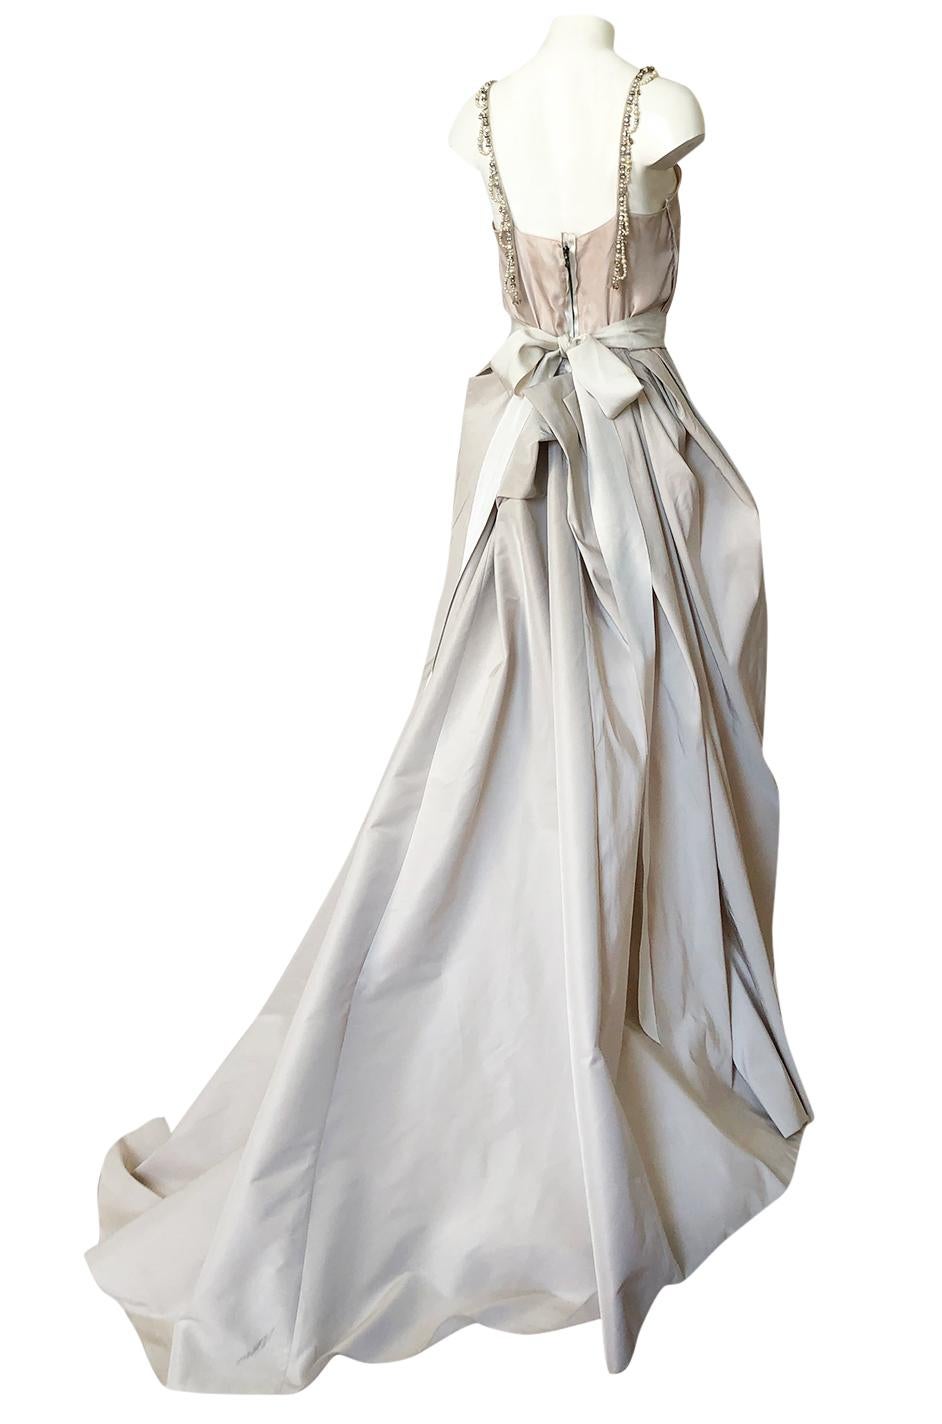 This is a lovely wedding gown by Alber Elbaz for Lanvin that we found reference to in a blog from 2012. The gown is just gorgeous and I love that is is not a traditional white but rather used a combination of a soft blush nude silk at the top and